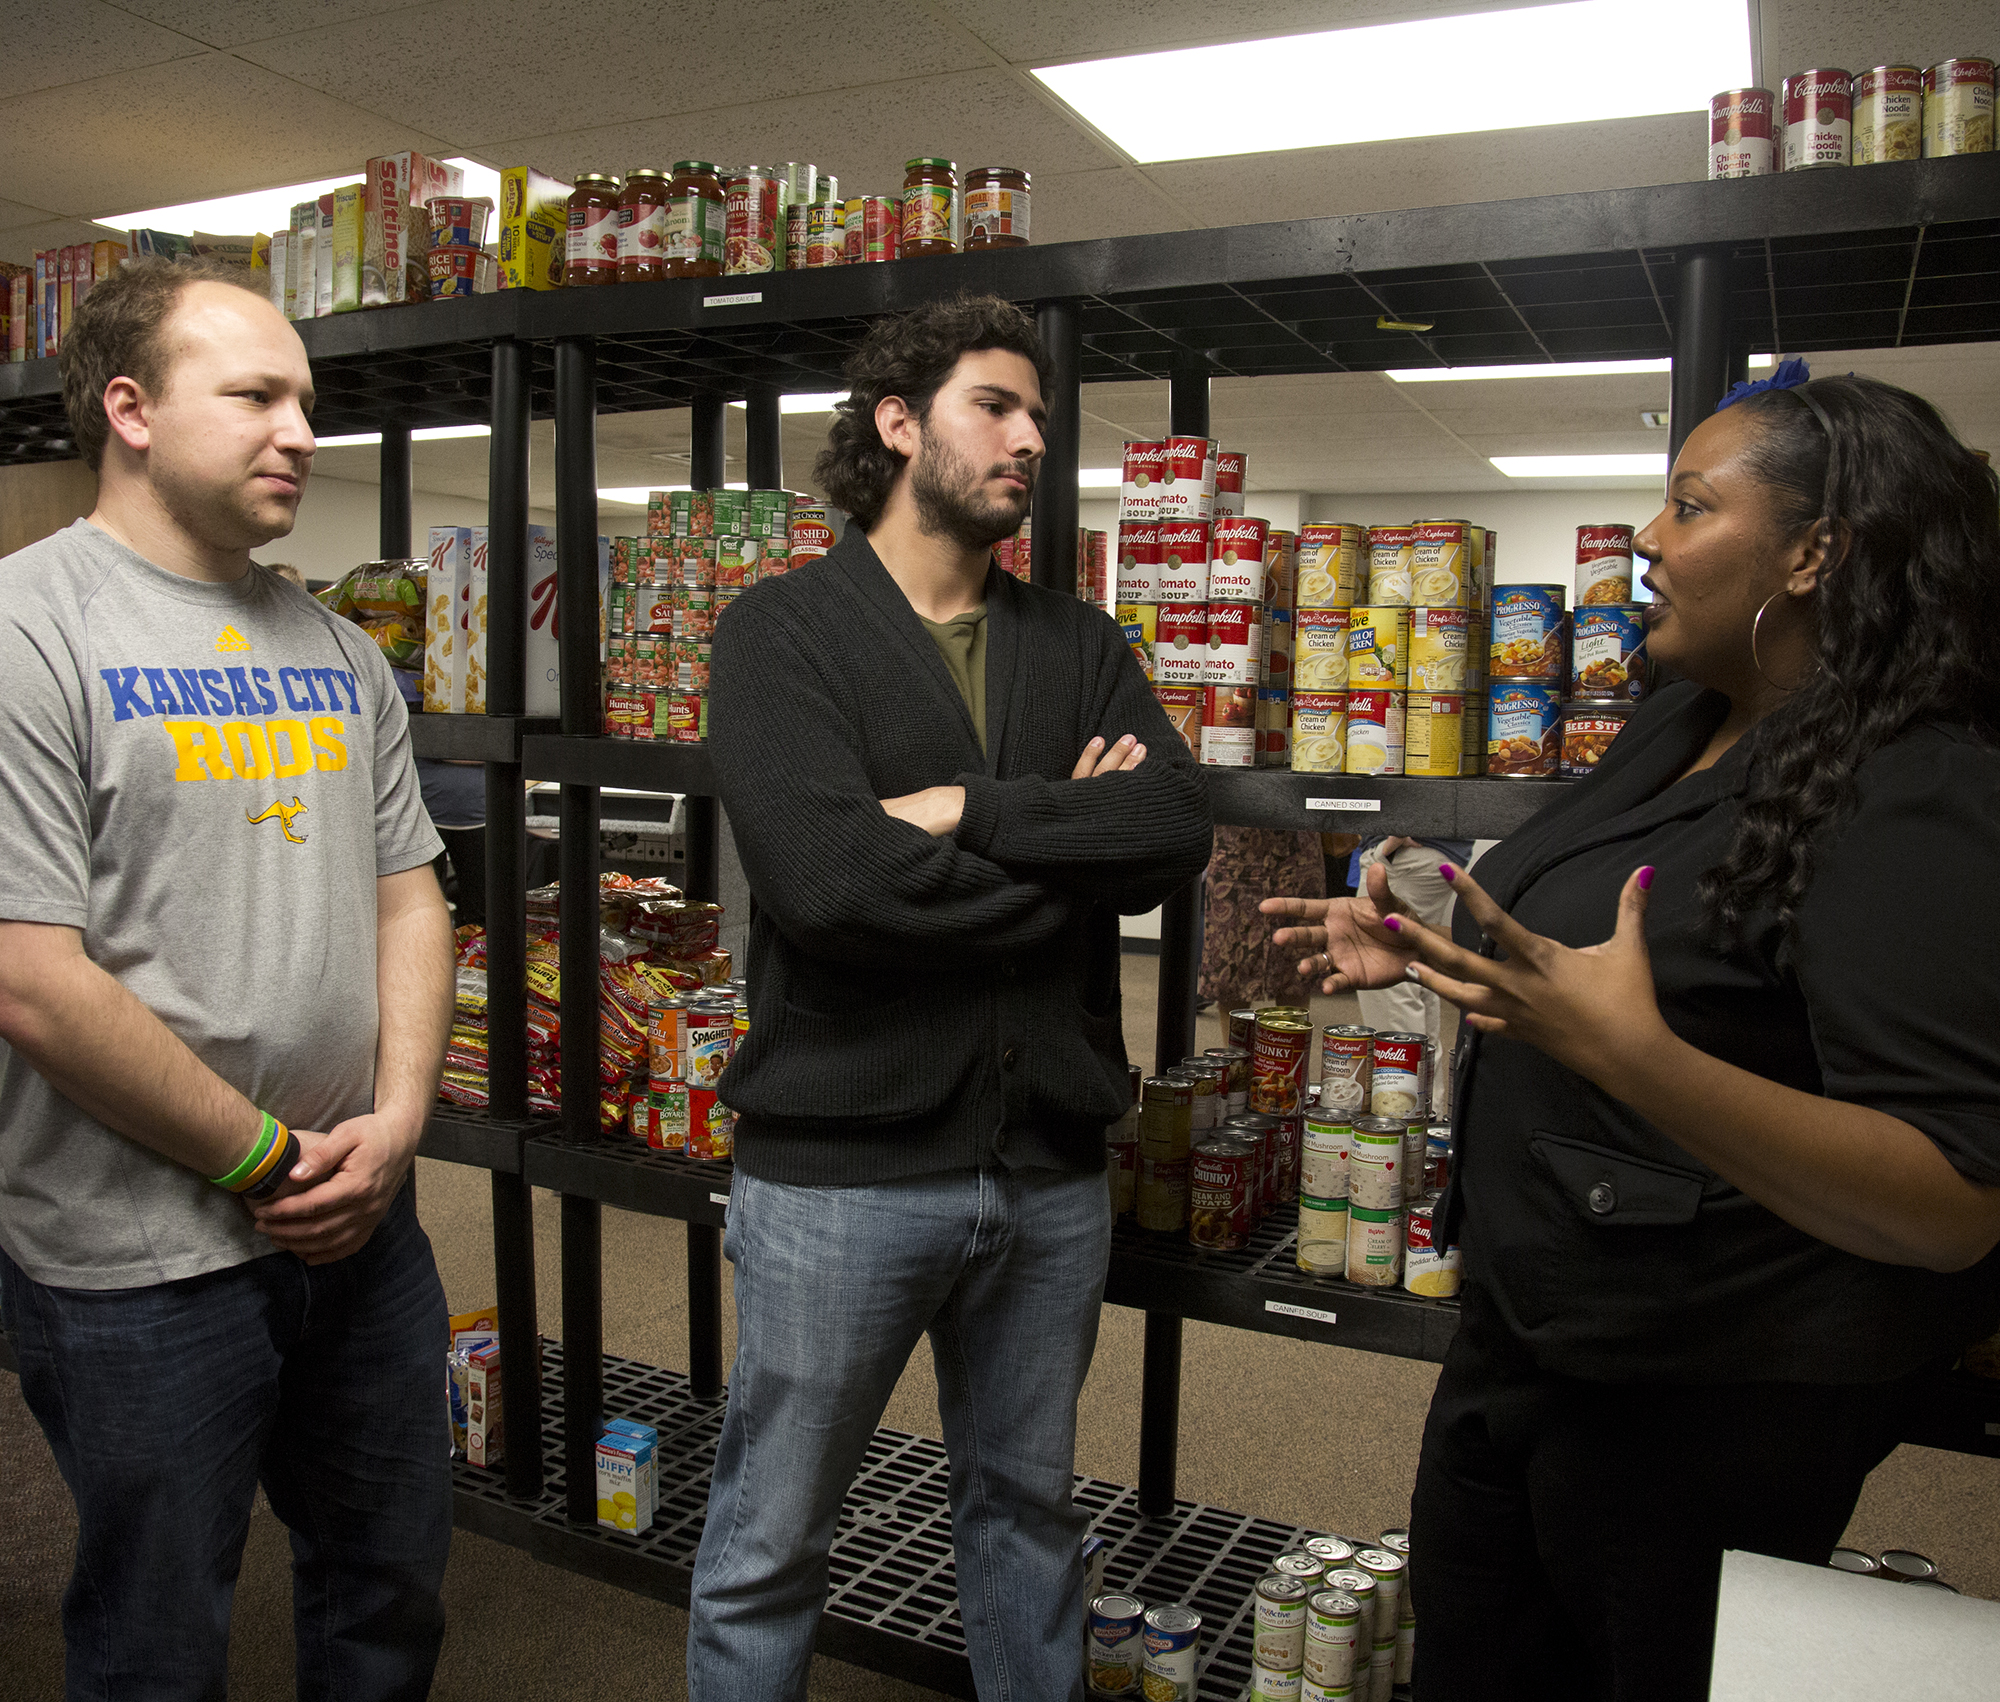 three people stand in front of shelves filled with canned goods in the Kangaroo Pantry